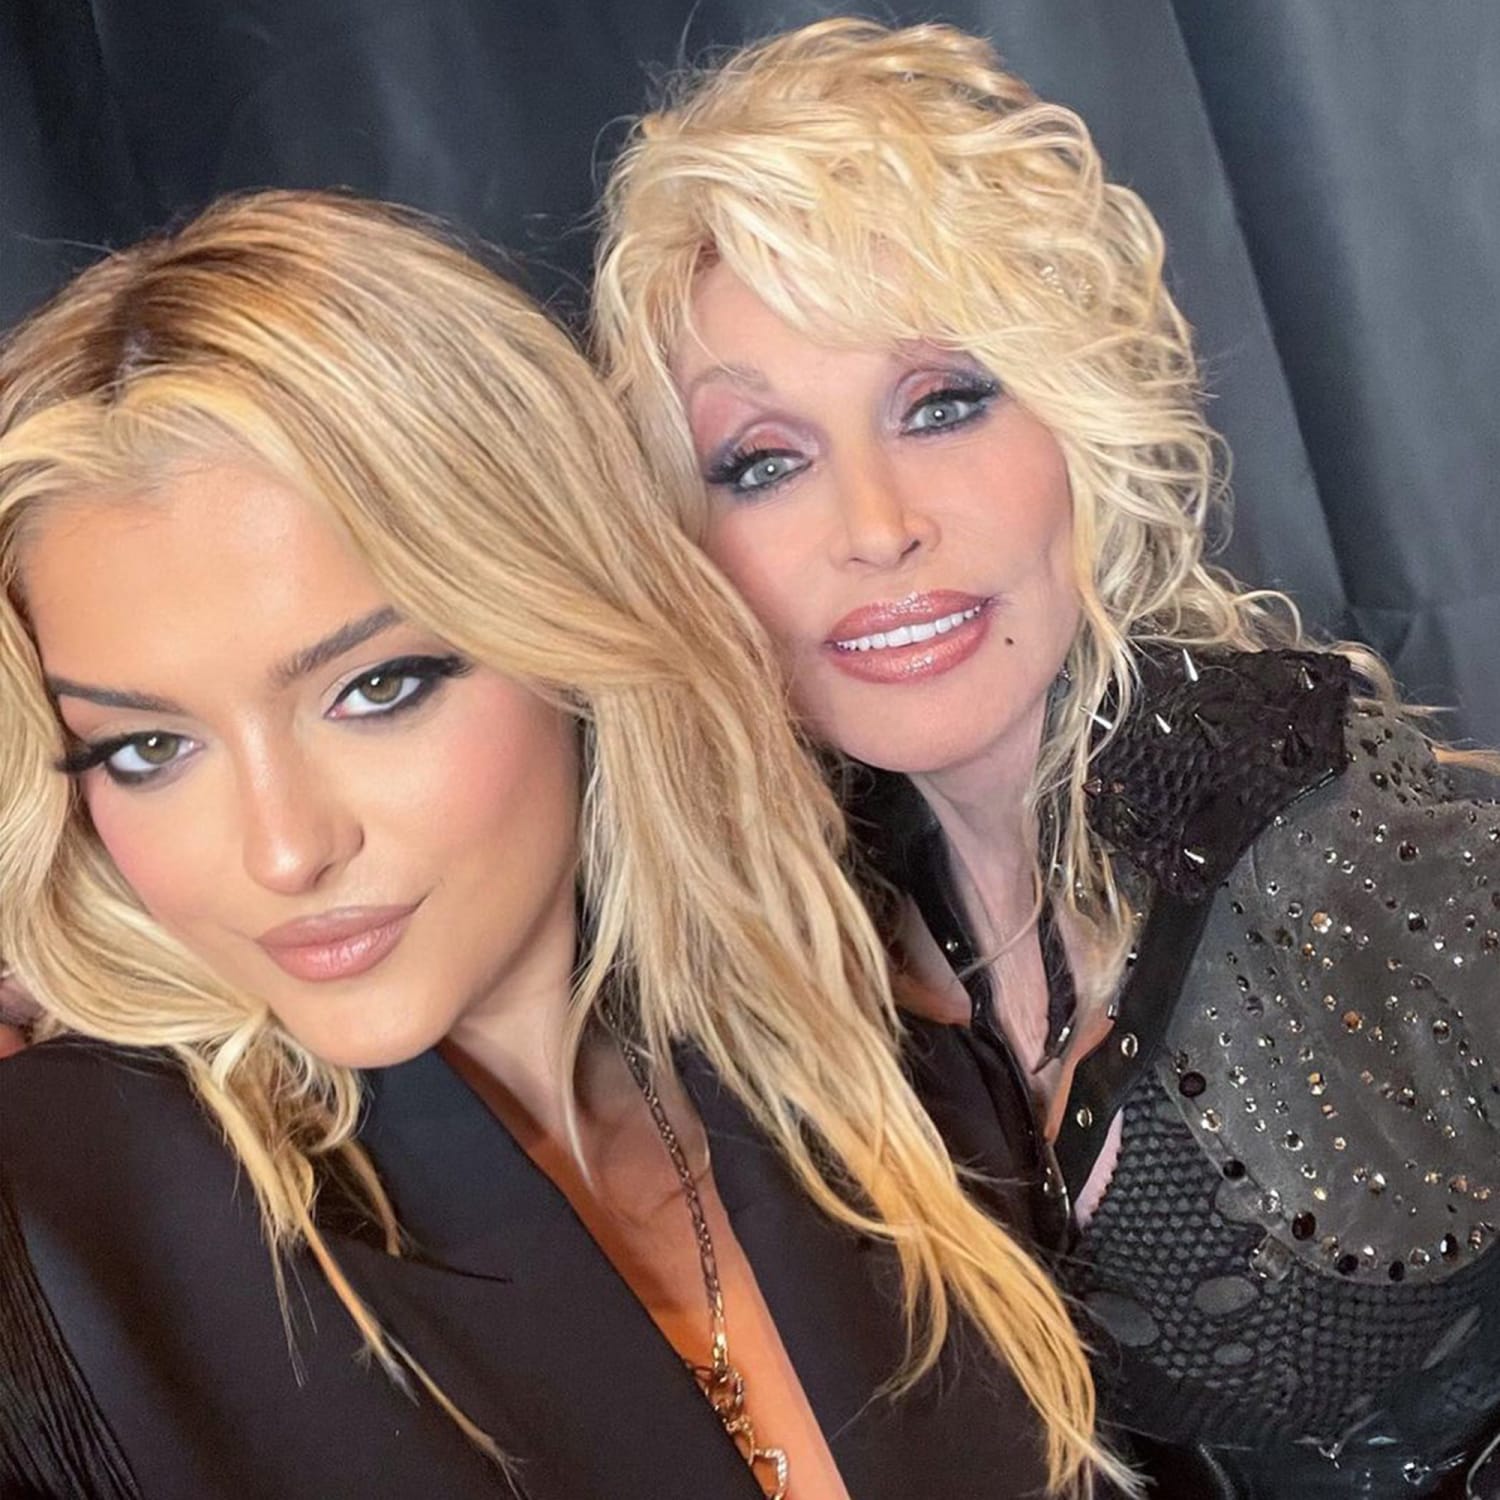 Bebe Rexha Explains Why Dolly Parton Once Turned Down A Duet With Her